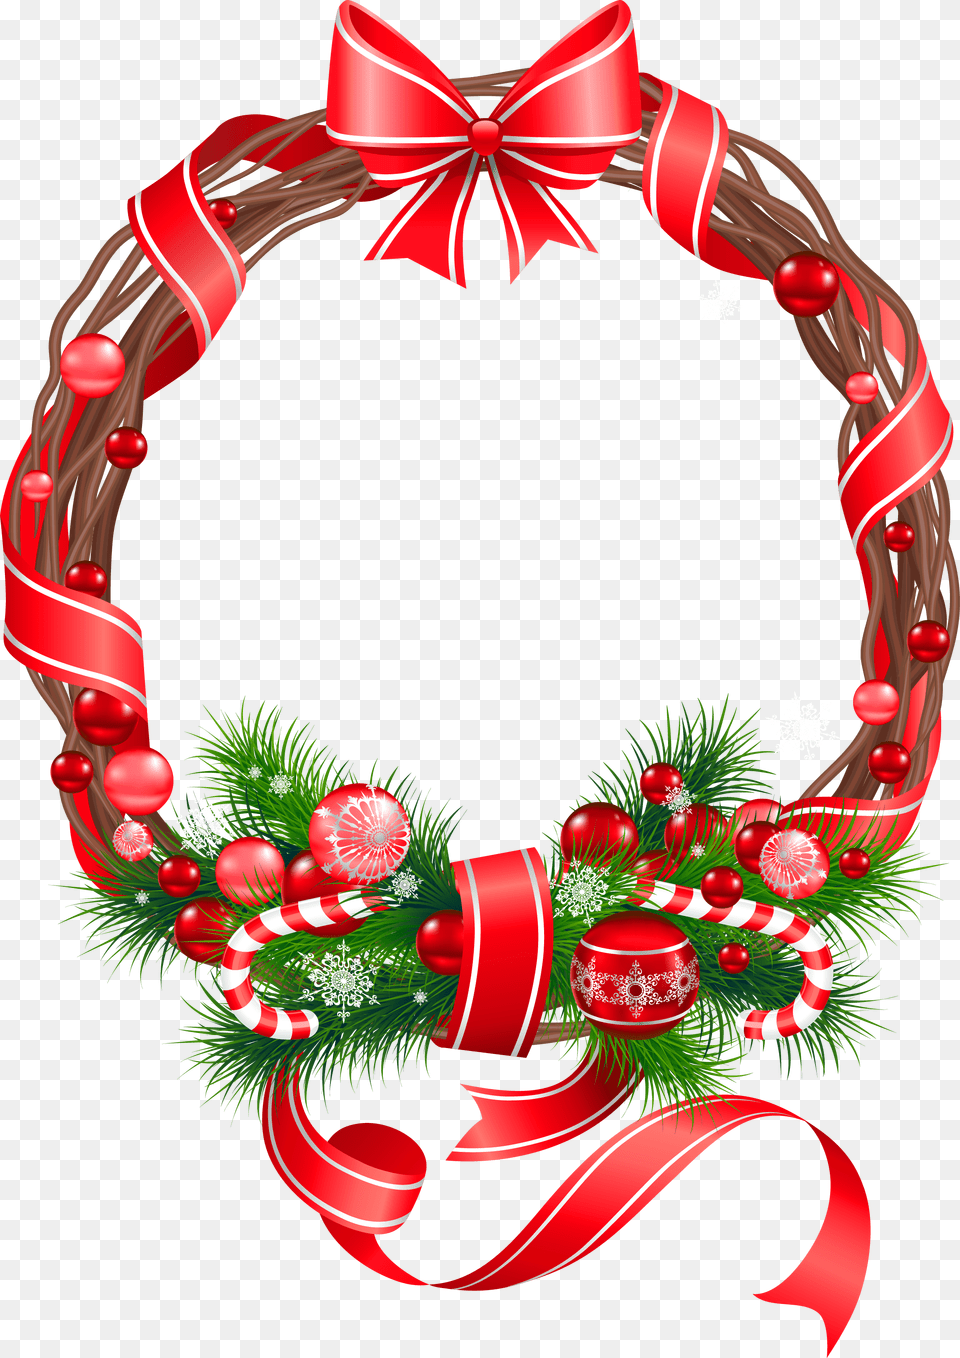 Cool In Color Wreath Holiday Wreath G Wreath Wreath, Dynamite, Weapon Free Transparent Png